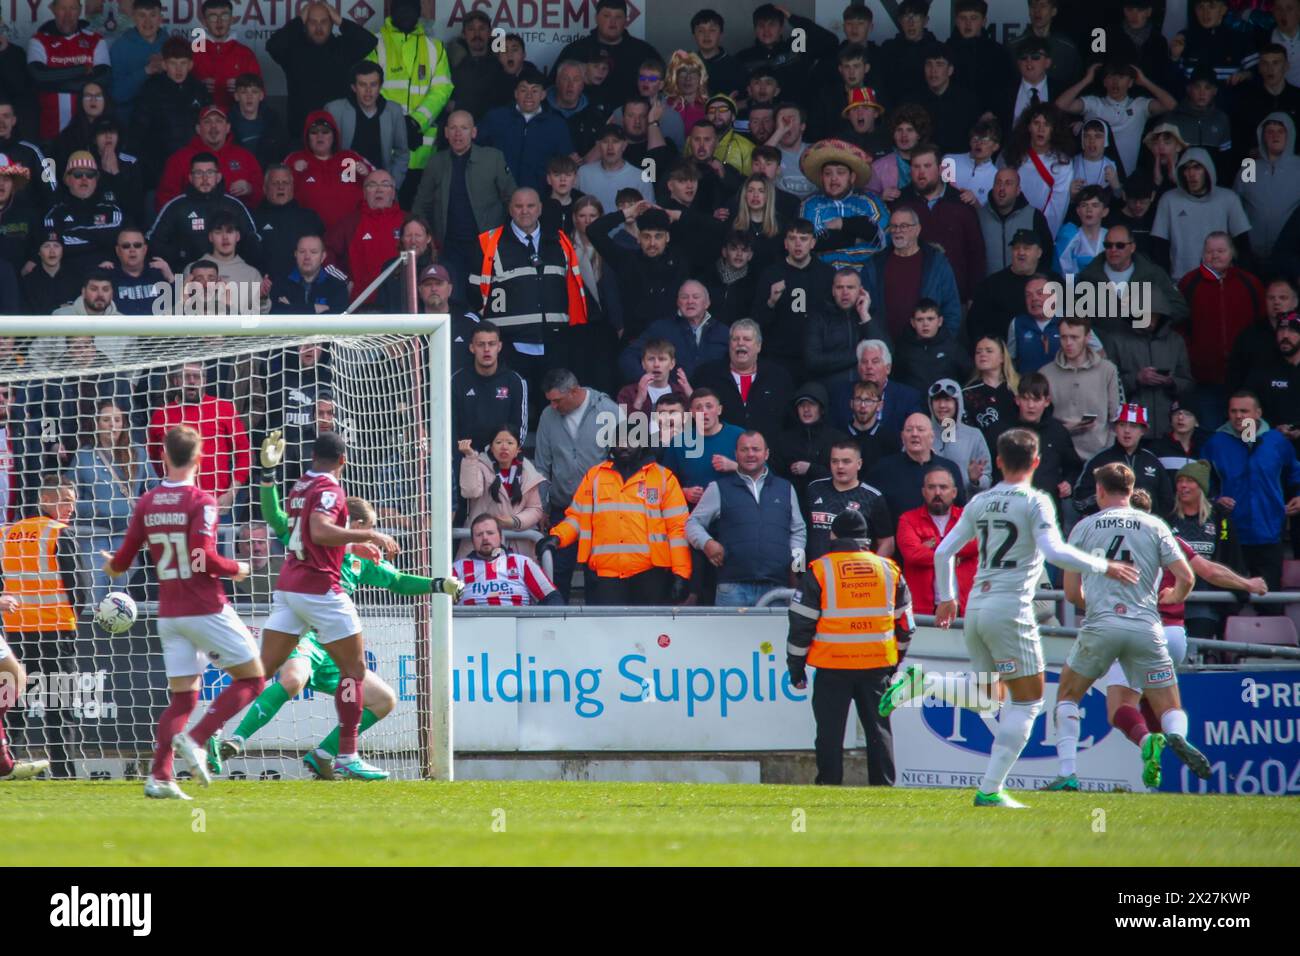 Northampton 20 April 2022:Exeter City's Will Aimson fires past Northampton Town goal keeper Lee Burge to score Exeter second and match winning goal in the EFL Division 1 Northampton Town v Exeter City Credit: Clive Stapleton/Alamy Live News Stock Photo